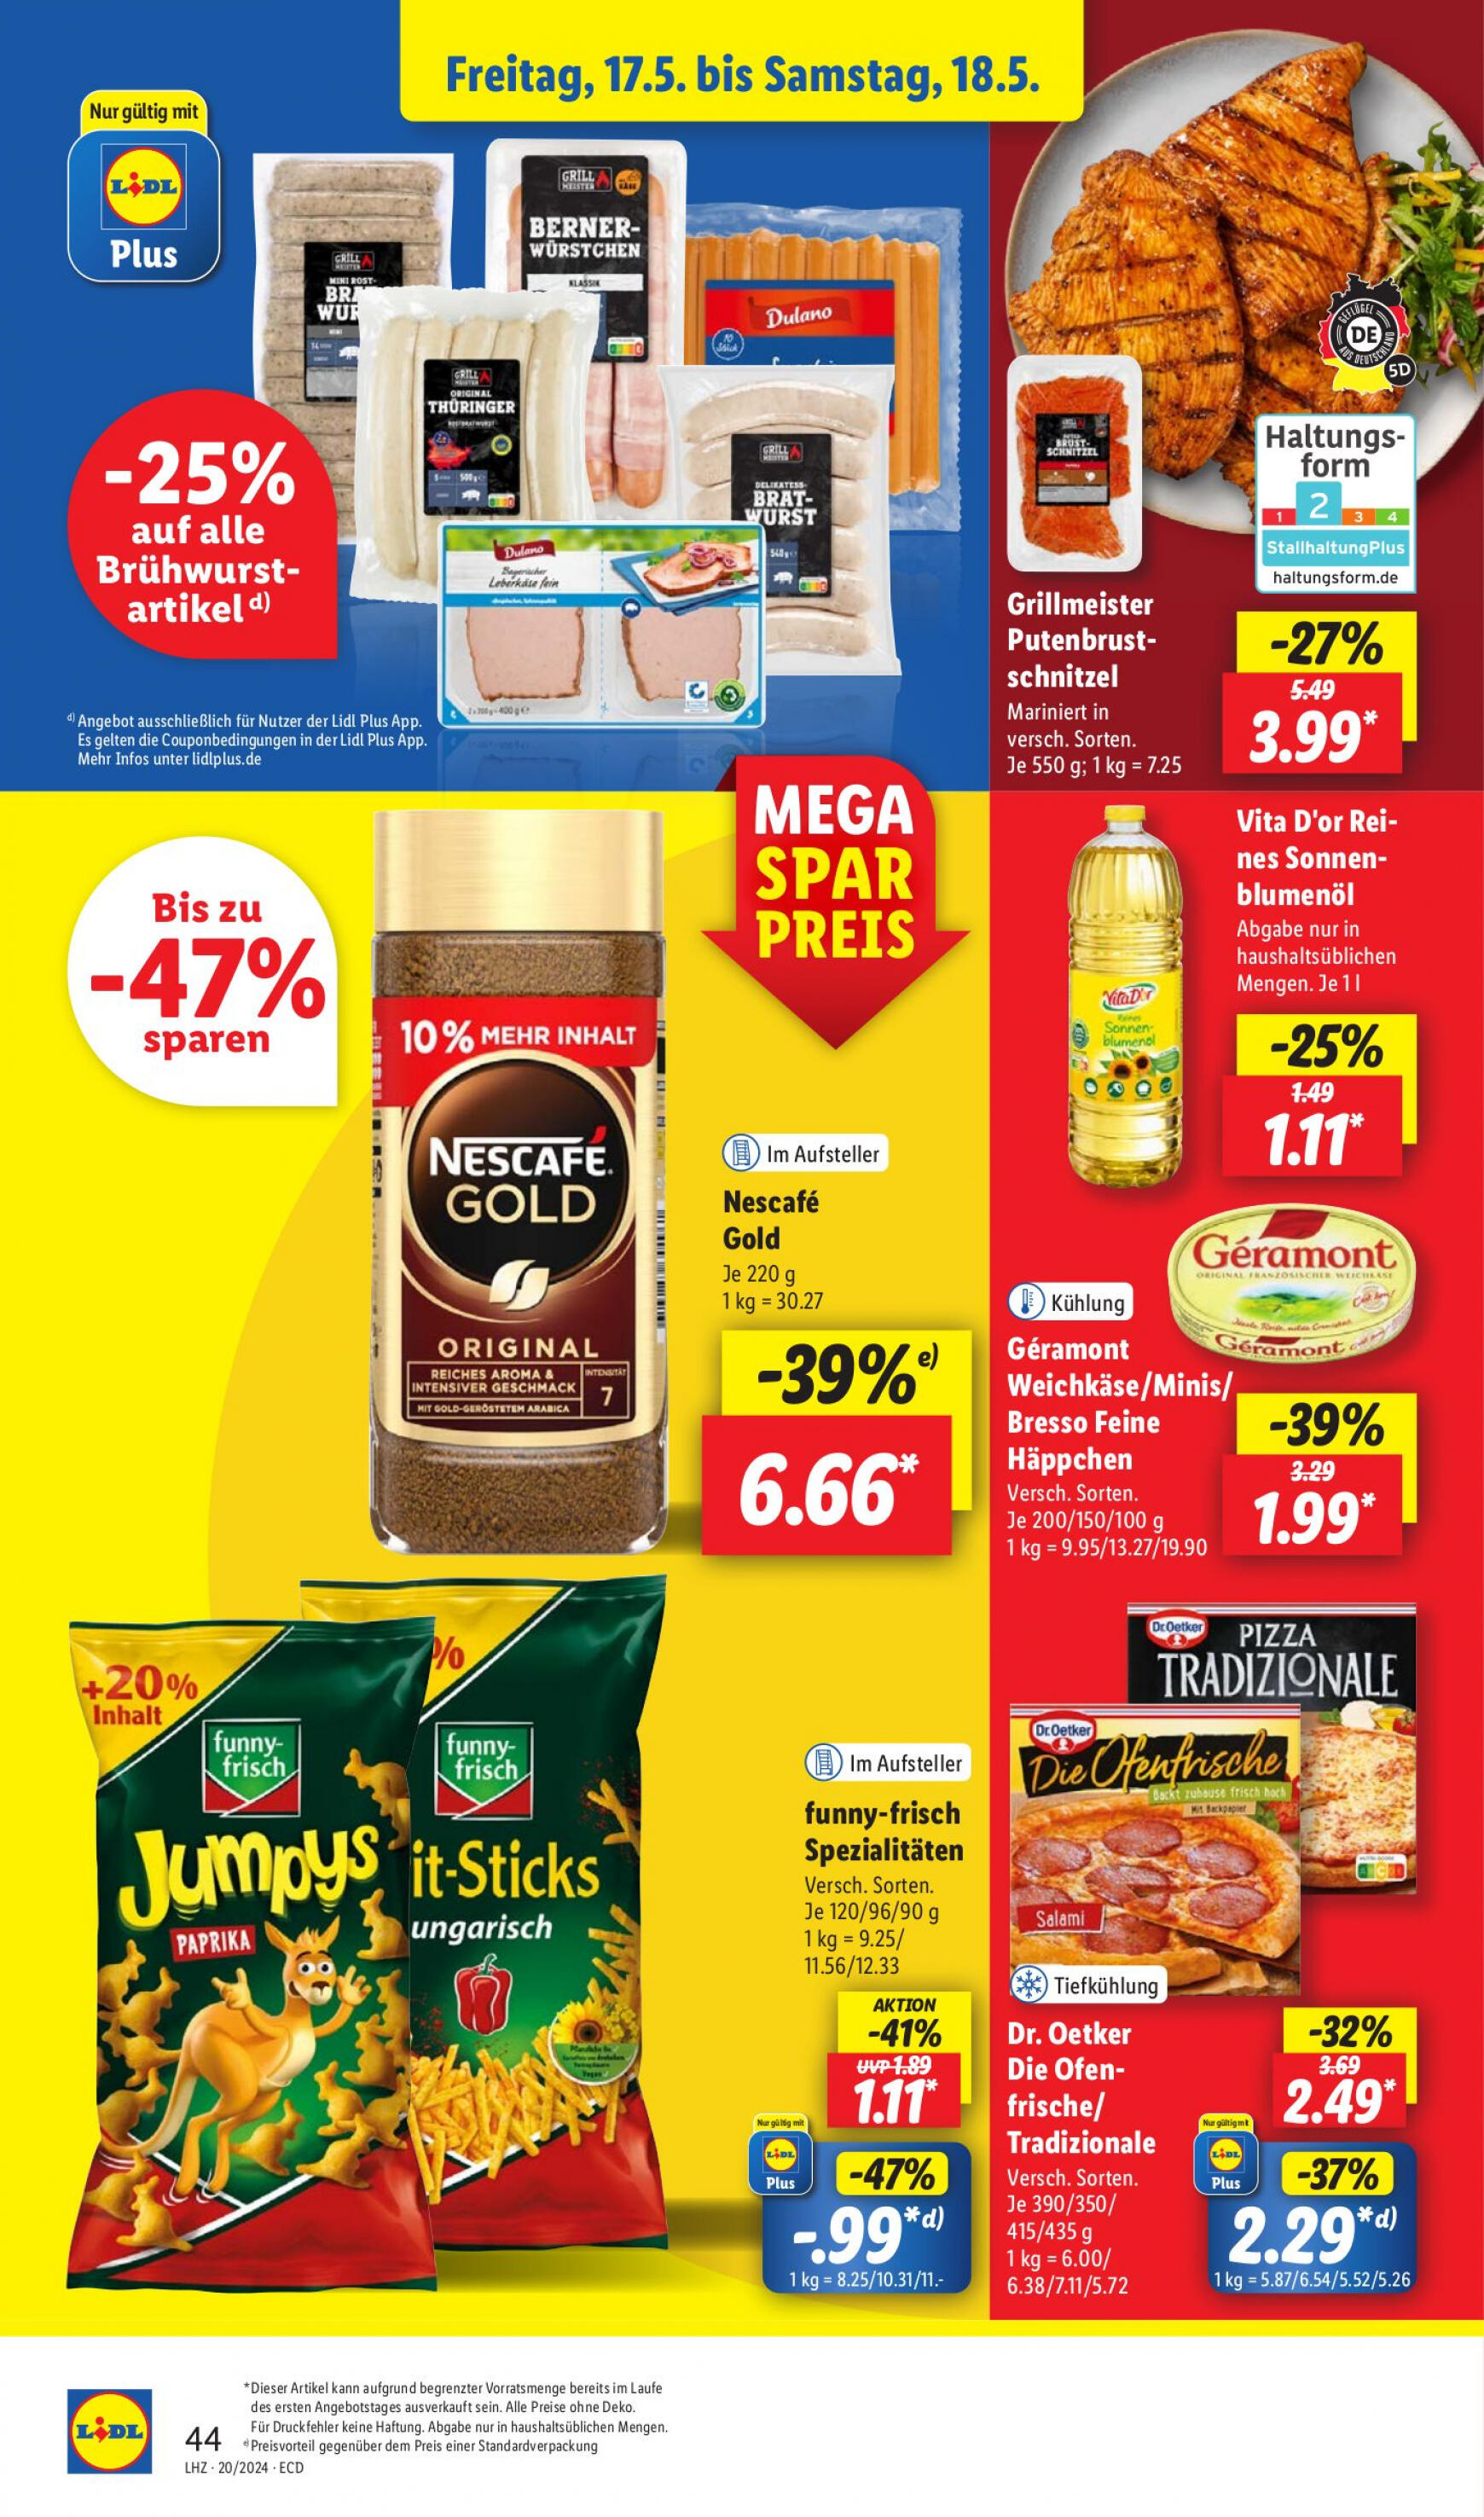 lidl - Flyer Lidl aktuell 13.05. - 18.05. - page: 54